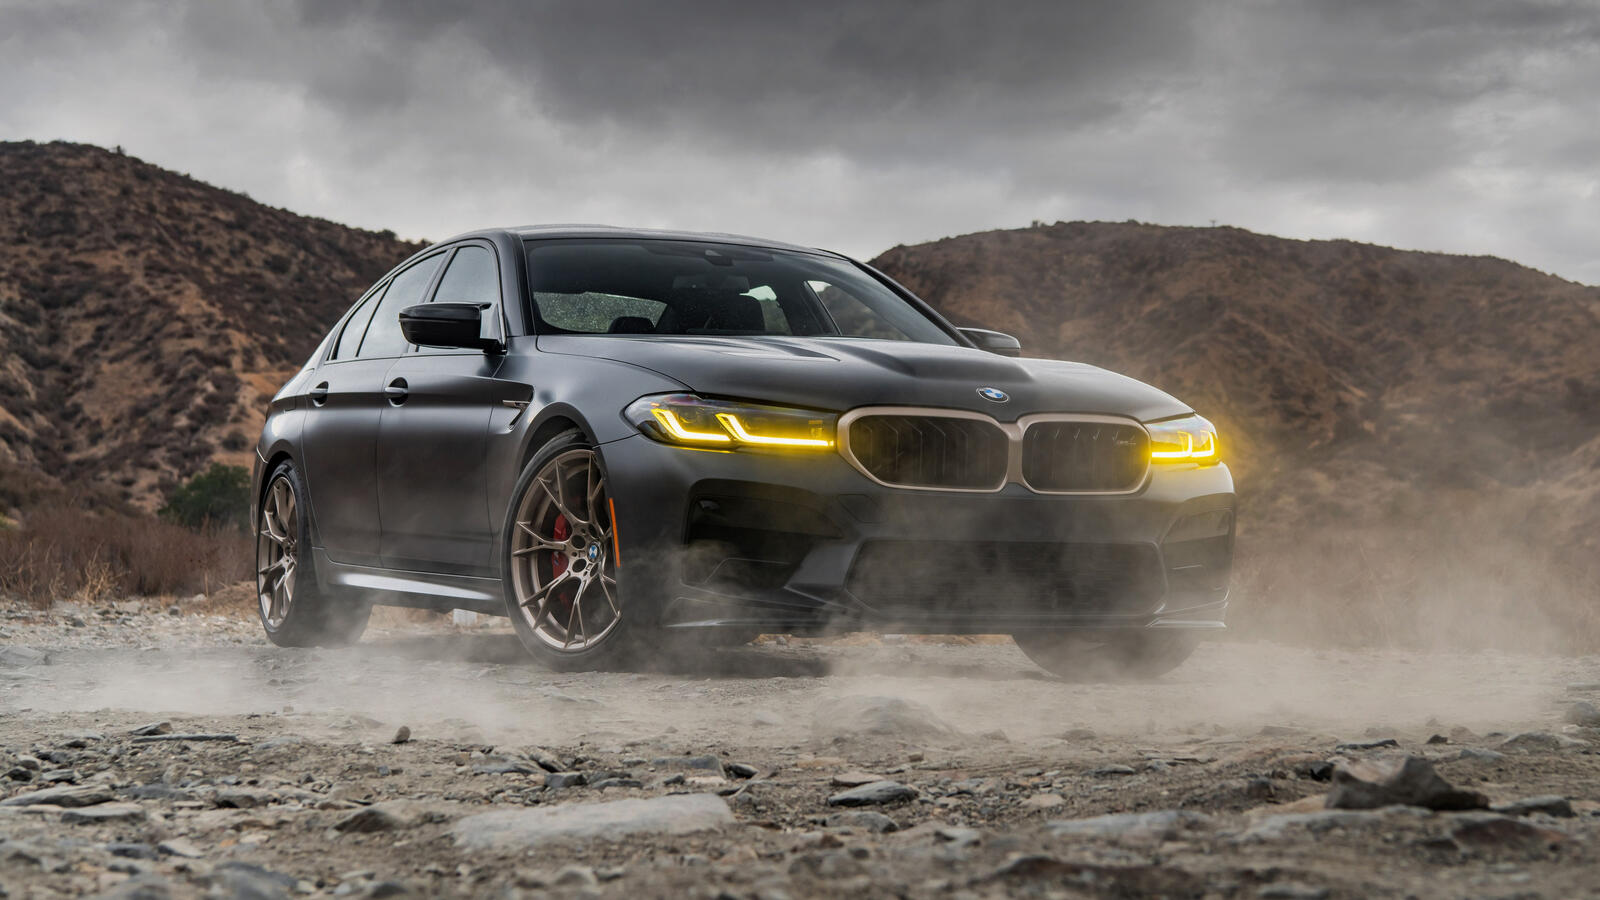 Free photo A bmw m5 f90 is parked in a dusty quarry.